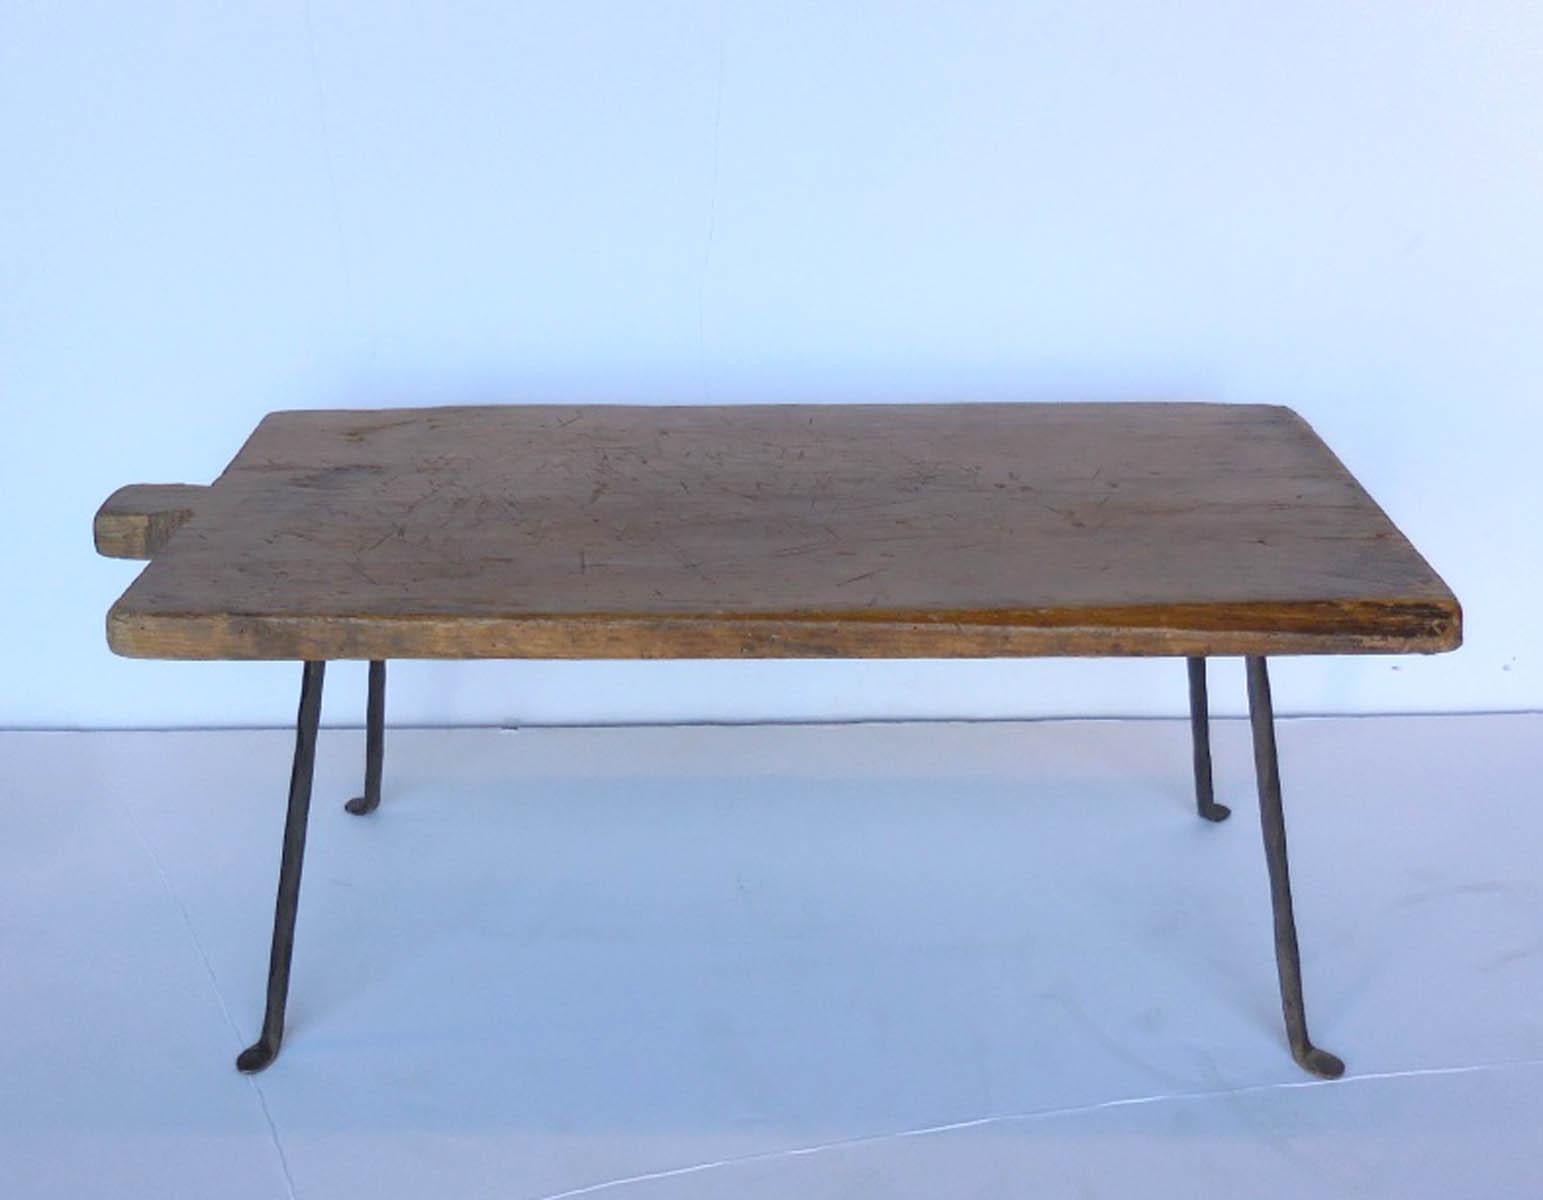 19th century wooden batea - tray - atop contemporary hand forged iron legs. Top  has been used and has a natural, beautiful patina, see photos.
Works well as a side table, nightstand or a small coffee table!